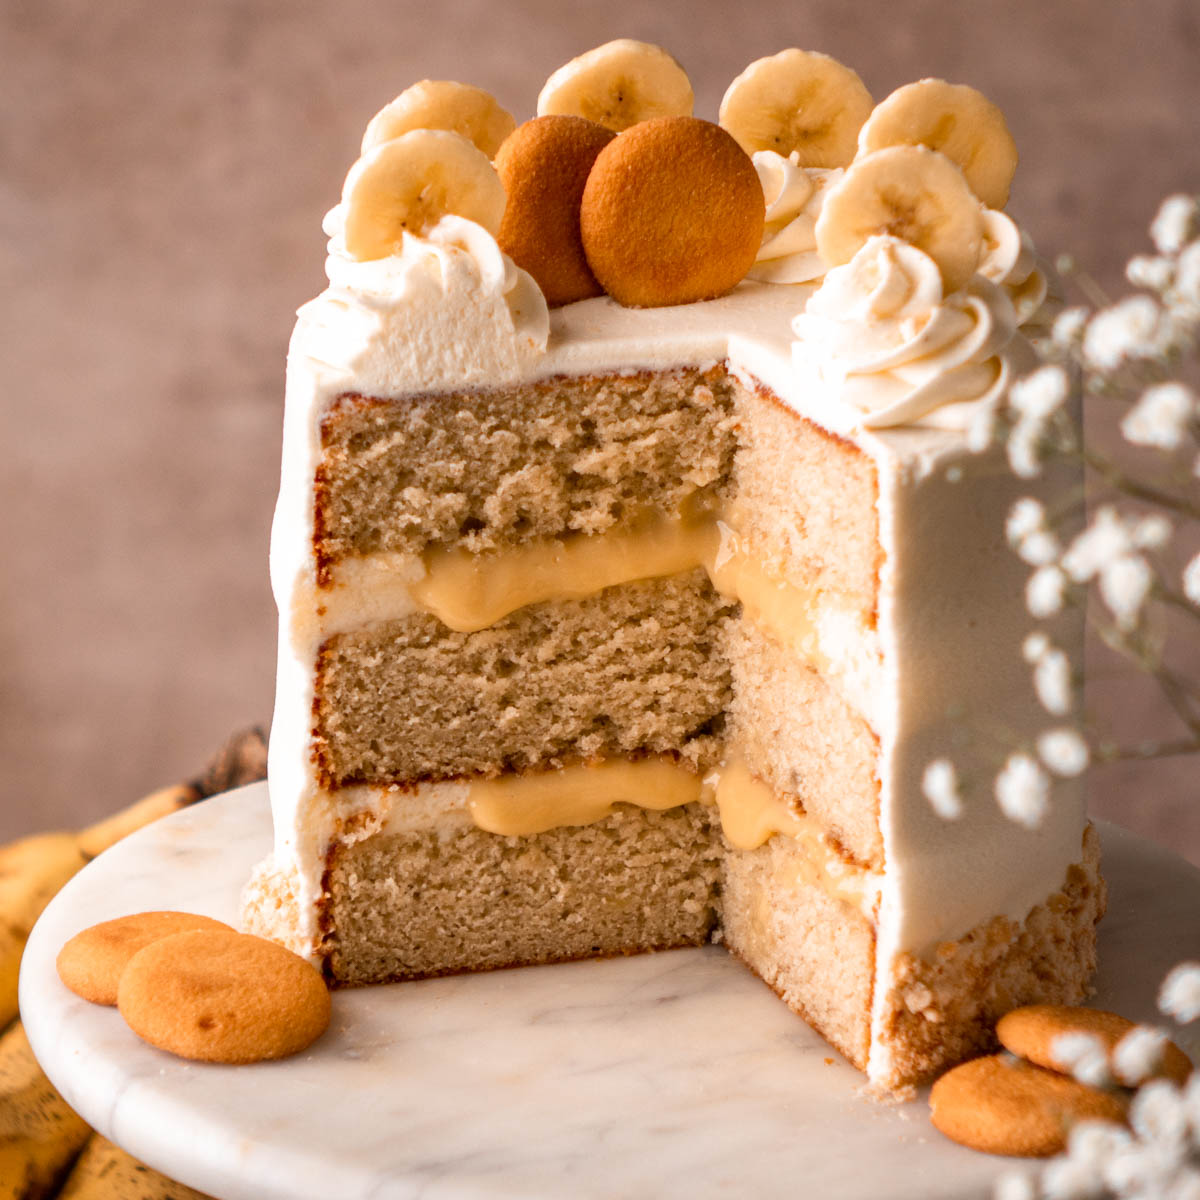 banana cream cake decorated with banana slices and Nilla Wafers, cut open with banana pudding filling, on a white marble cake stand with bananas in the background